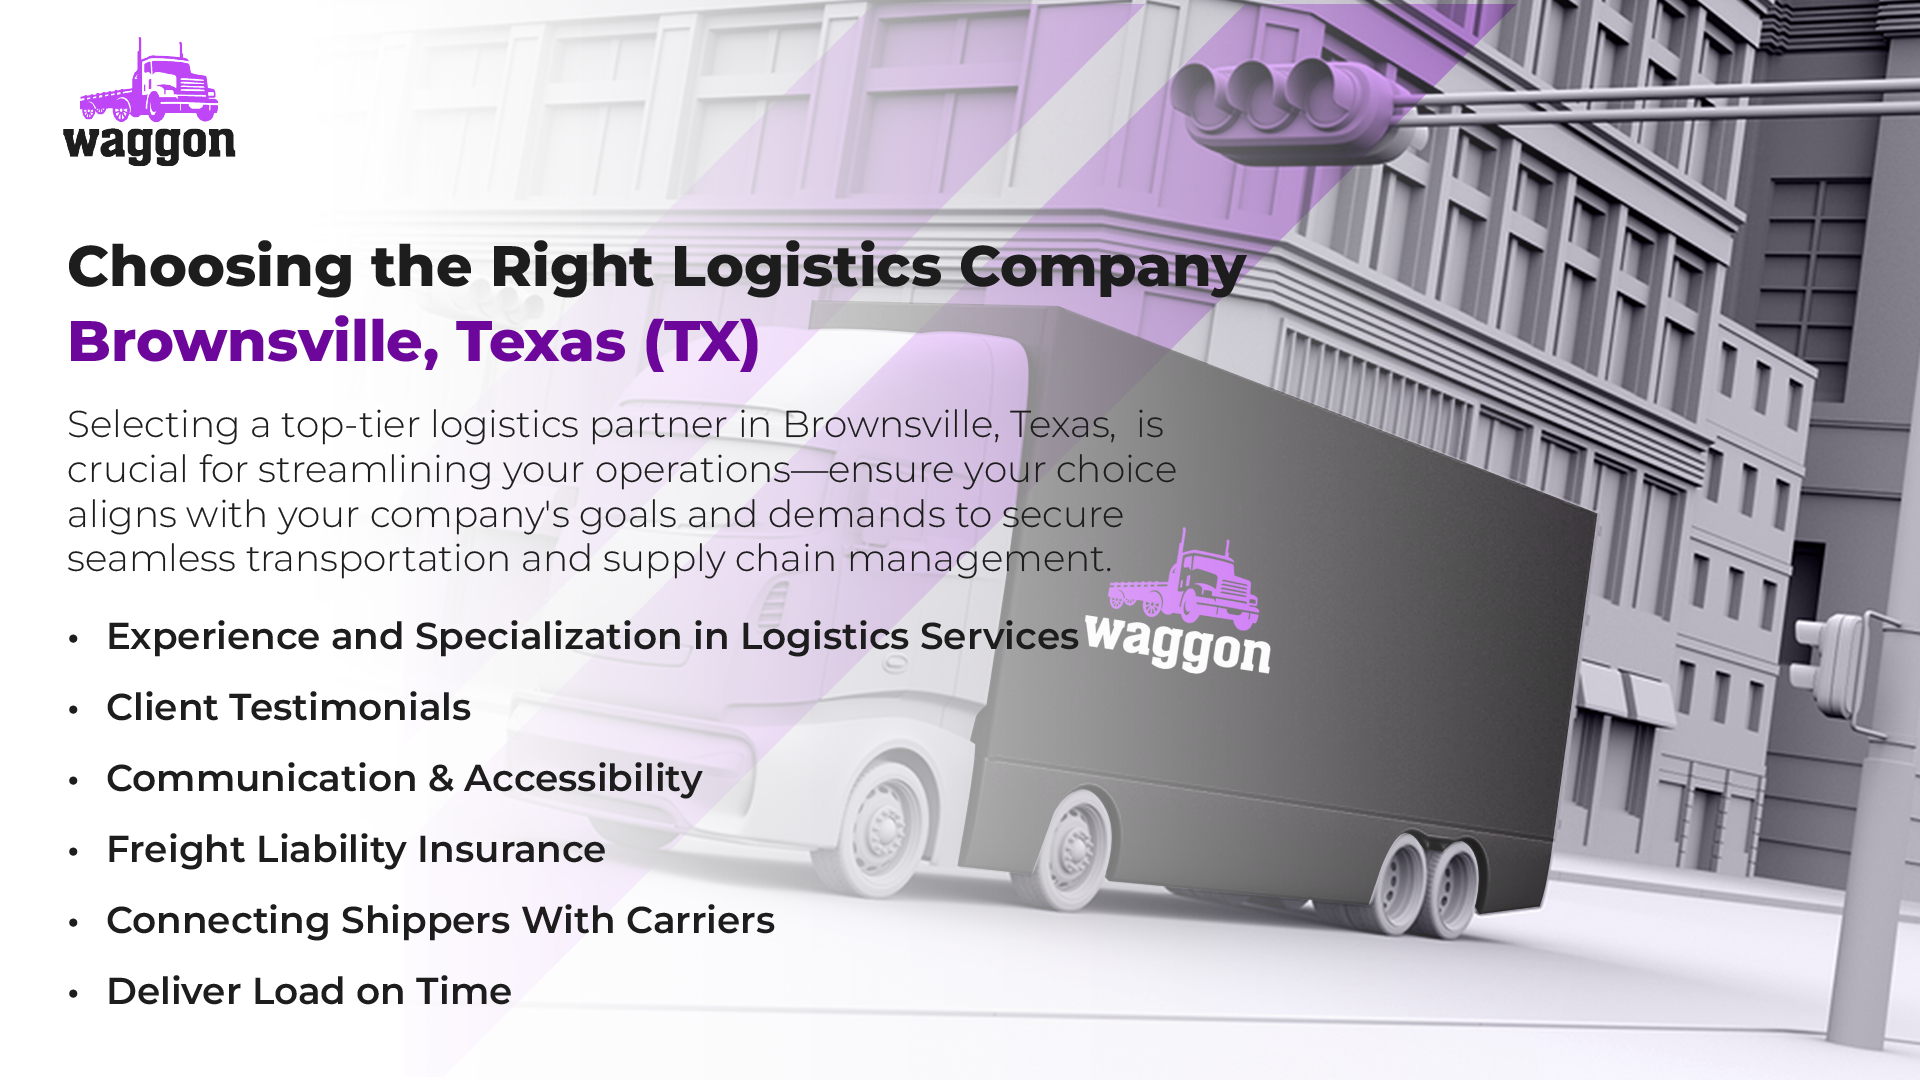 Choosing the Right Logistics Company in Brownsville, Texas (TX)